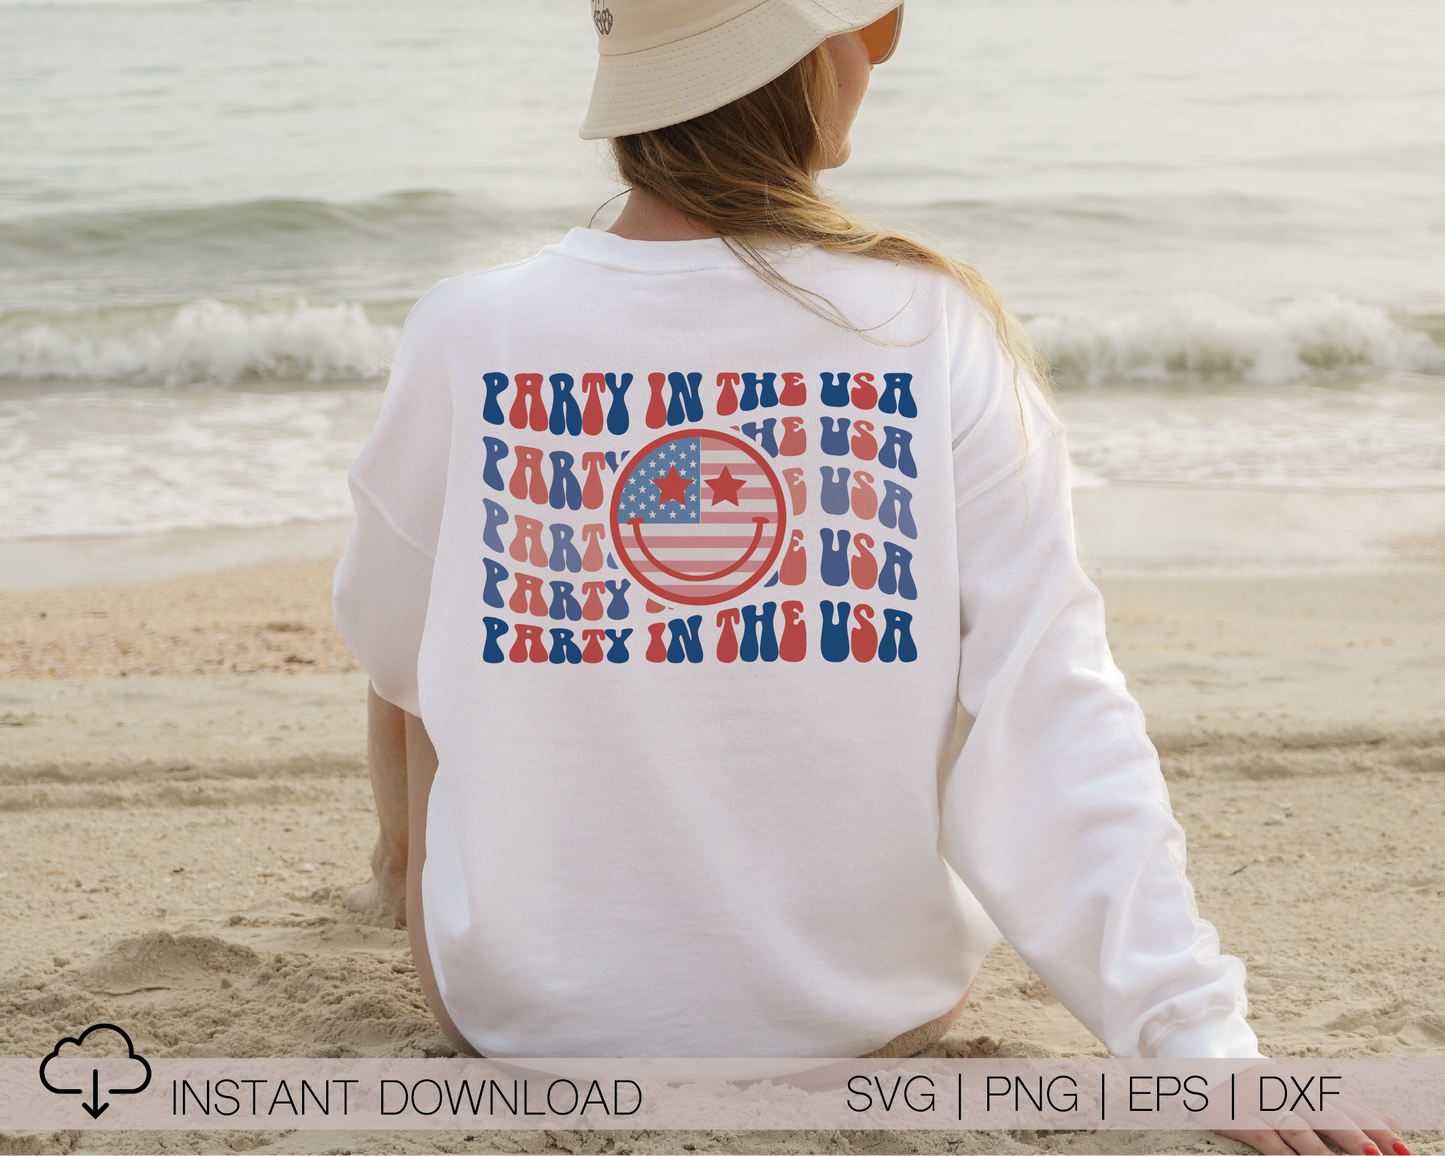 Party in the USA SVG PNG | American Smile Face Sublimation | Fourth of July | Retro Vintage T shirt Design